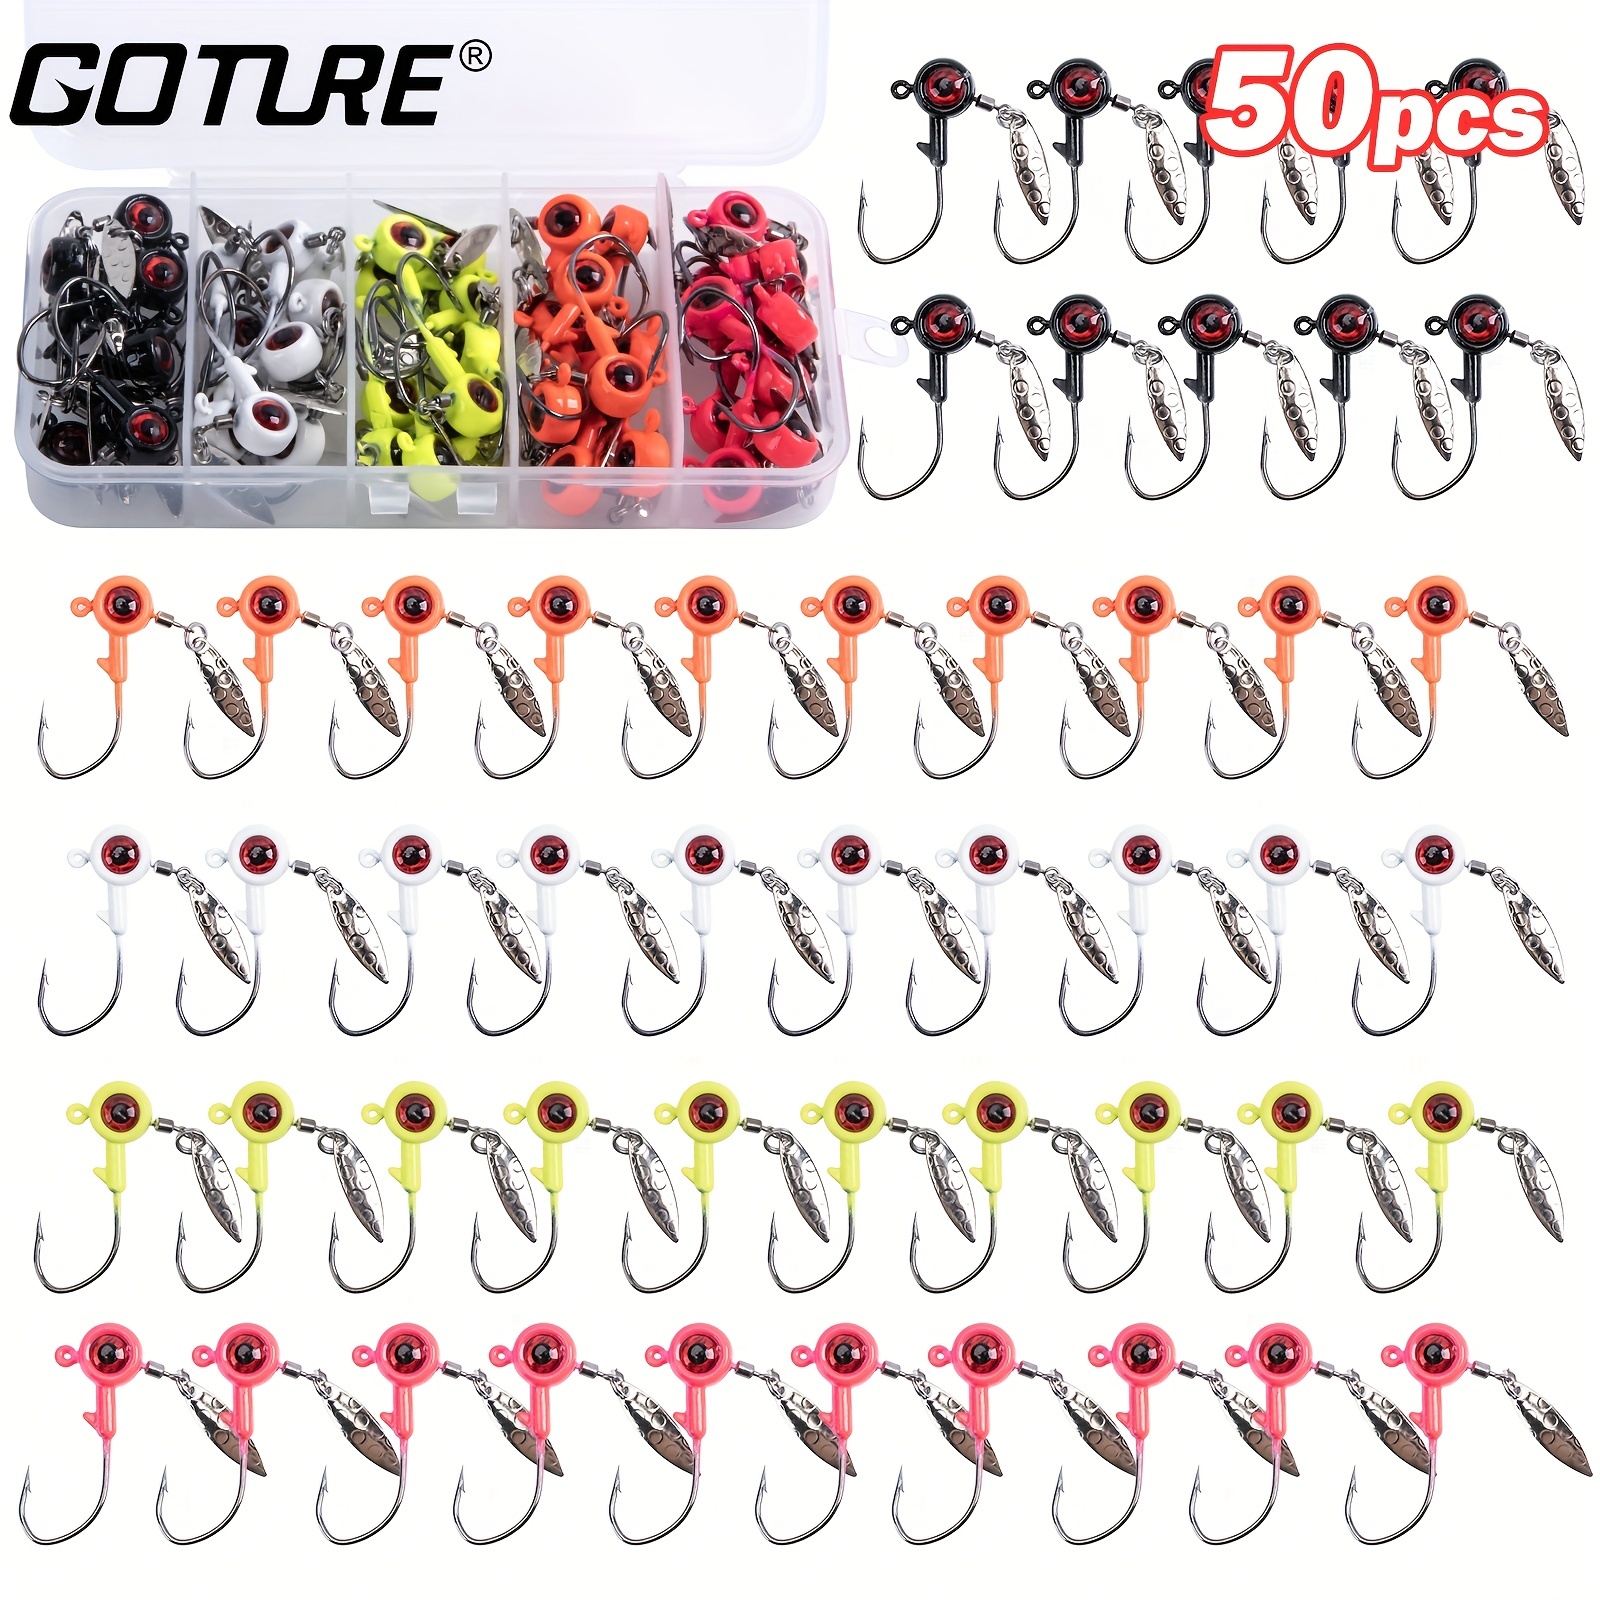 Goture - Latest Styles & Trends